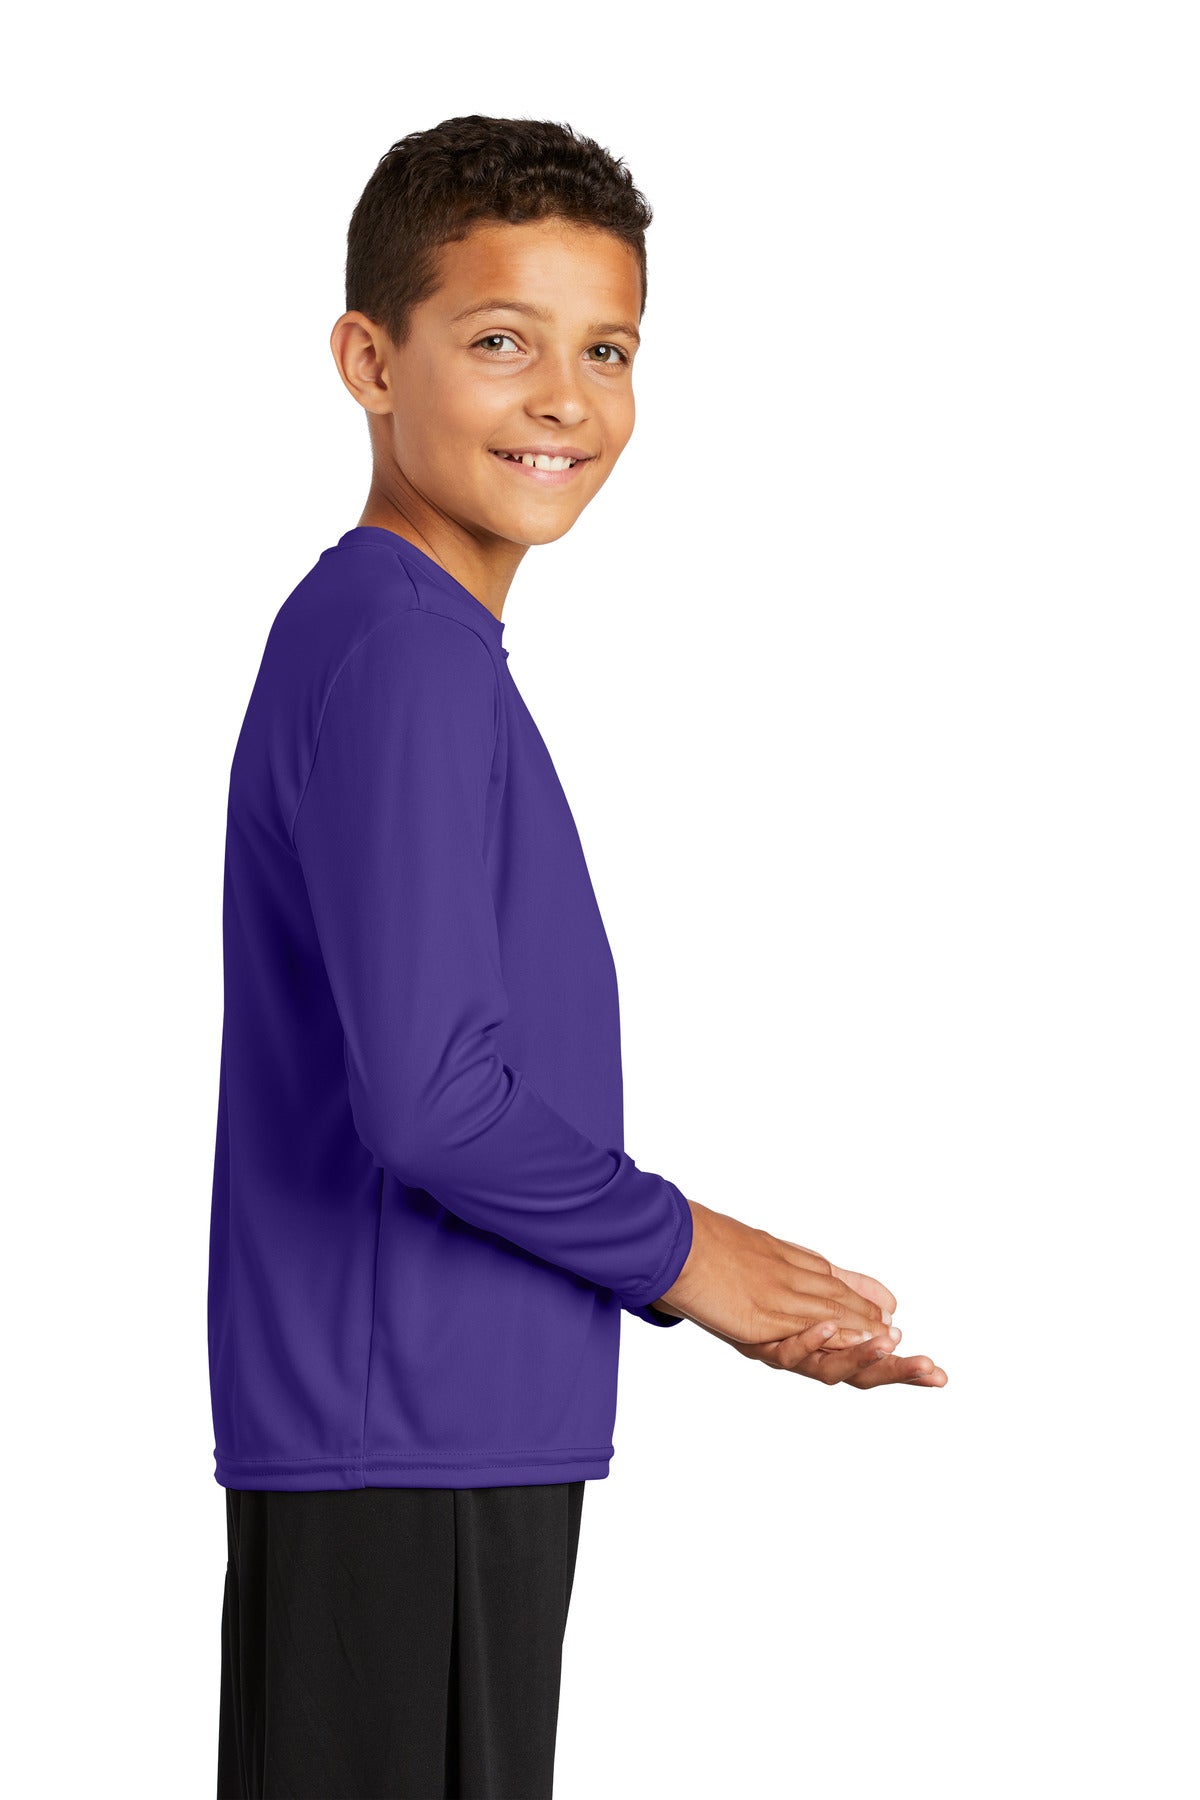 Sport-Tek® Youth Long Sleeve PosiCharge® Competitor™ Tee. YST350LS [Purple] - DFW Impression